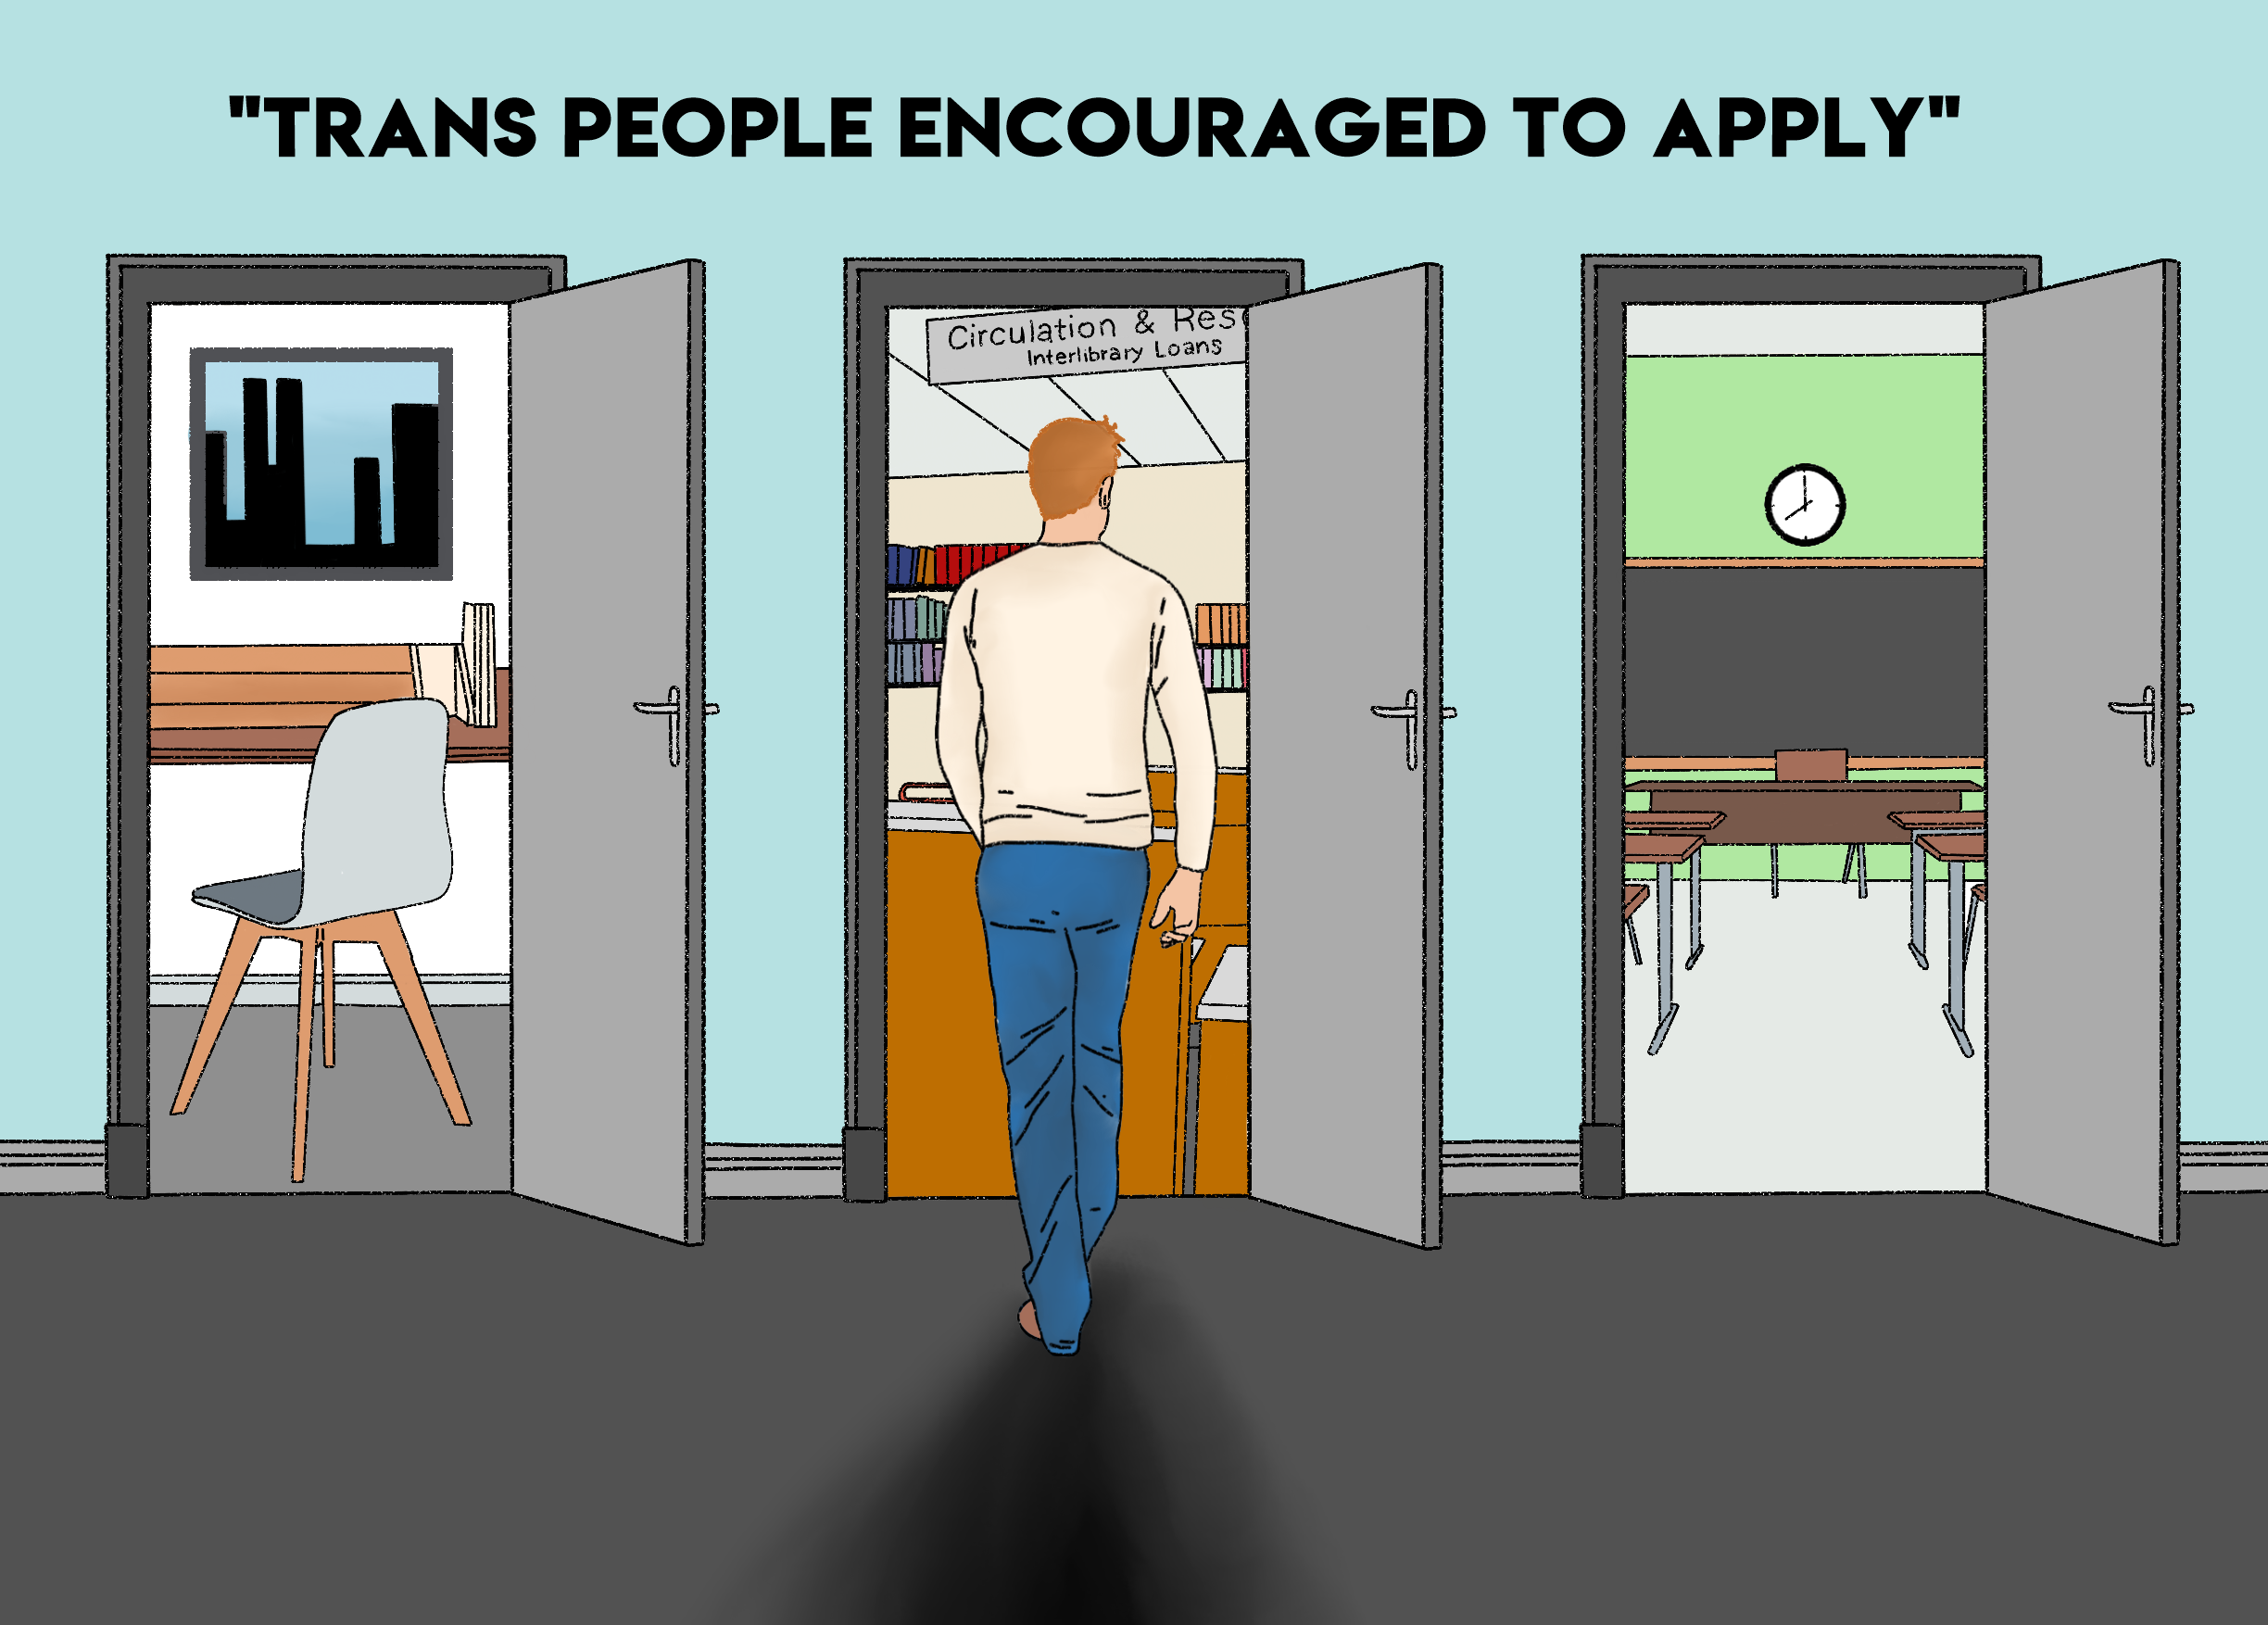 An image of a person walking into a library door, with two doors either side showing a hair salon and a construction site. The heading above says "Trans people encouraged to apply".